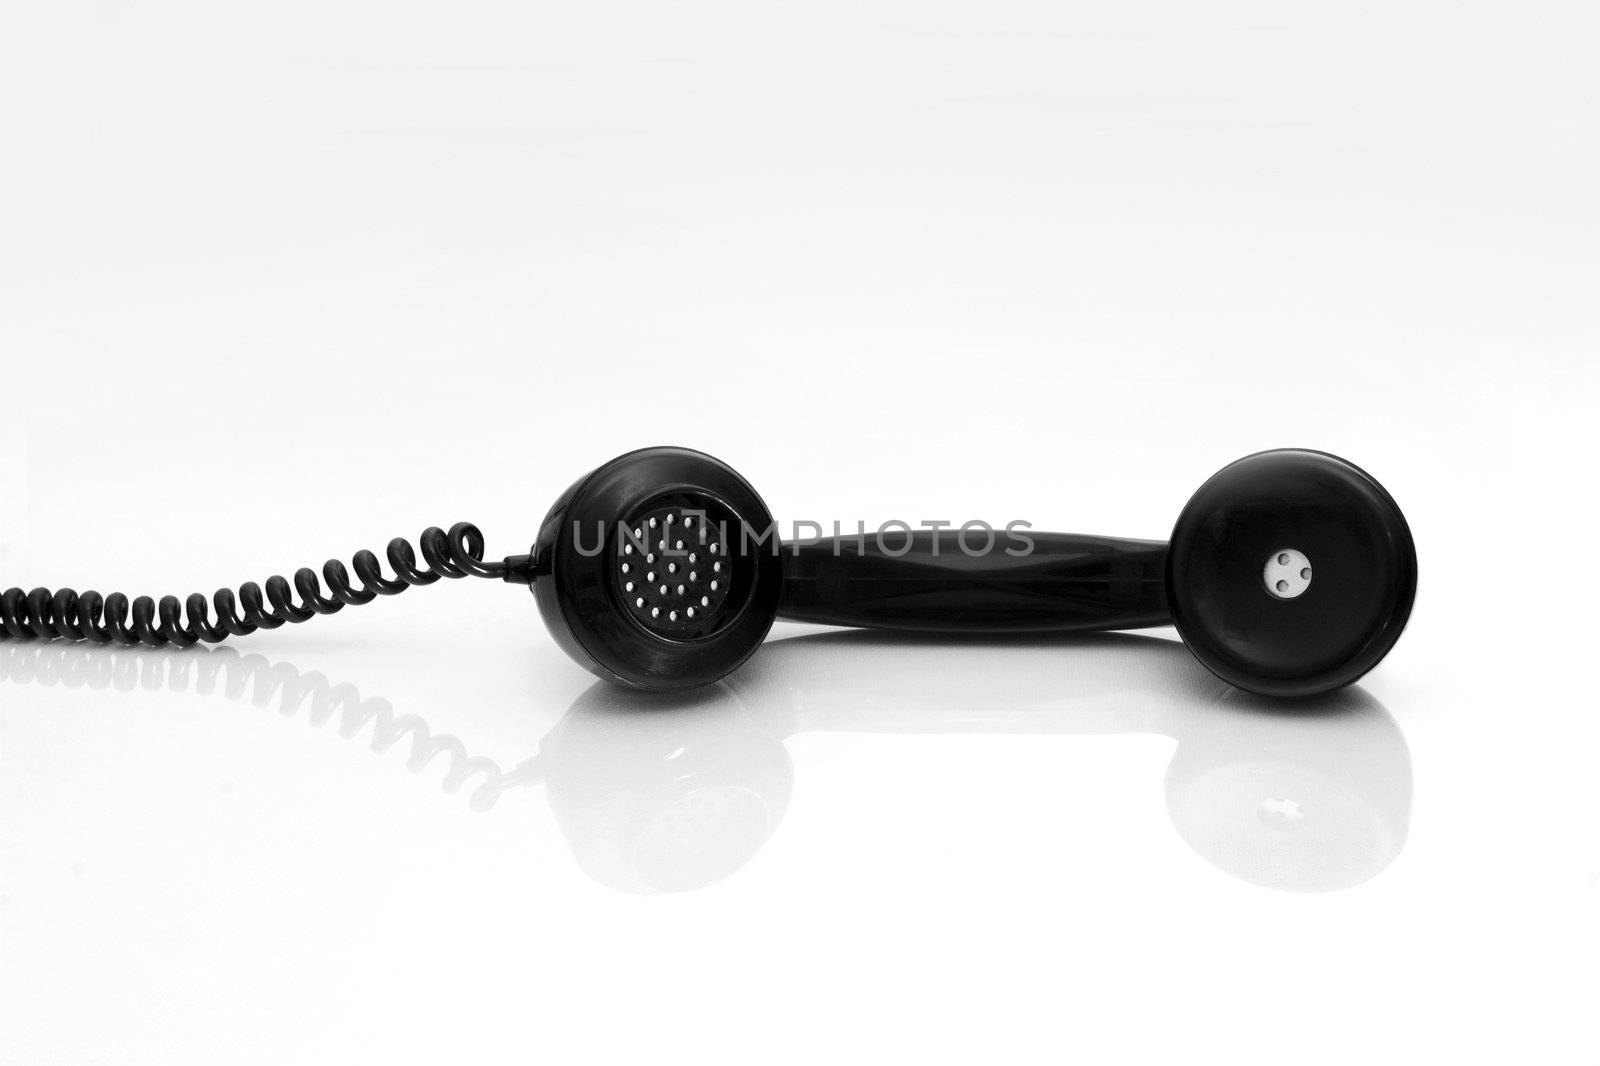 Antiquated phone handset with reflection